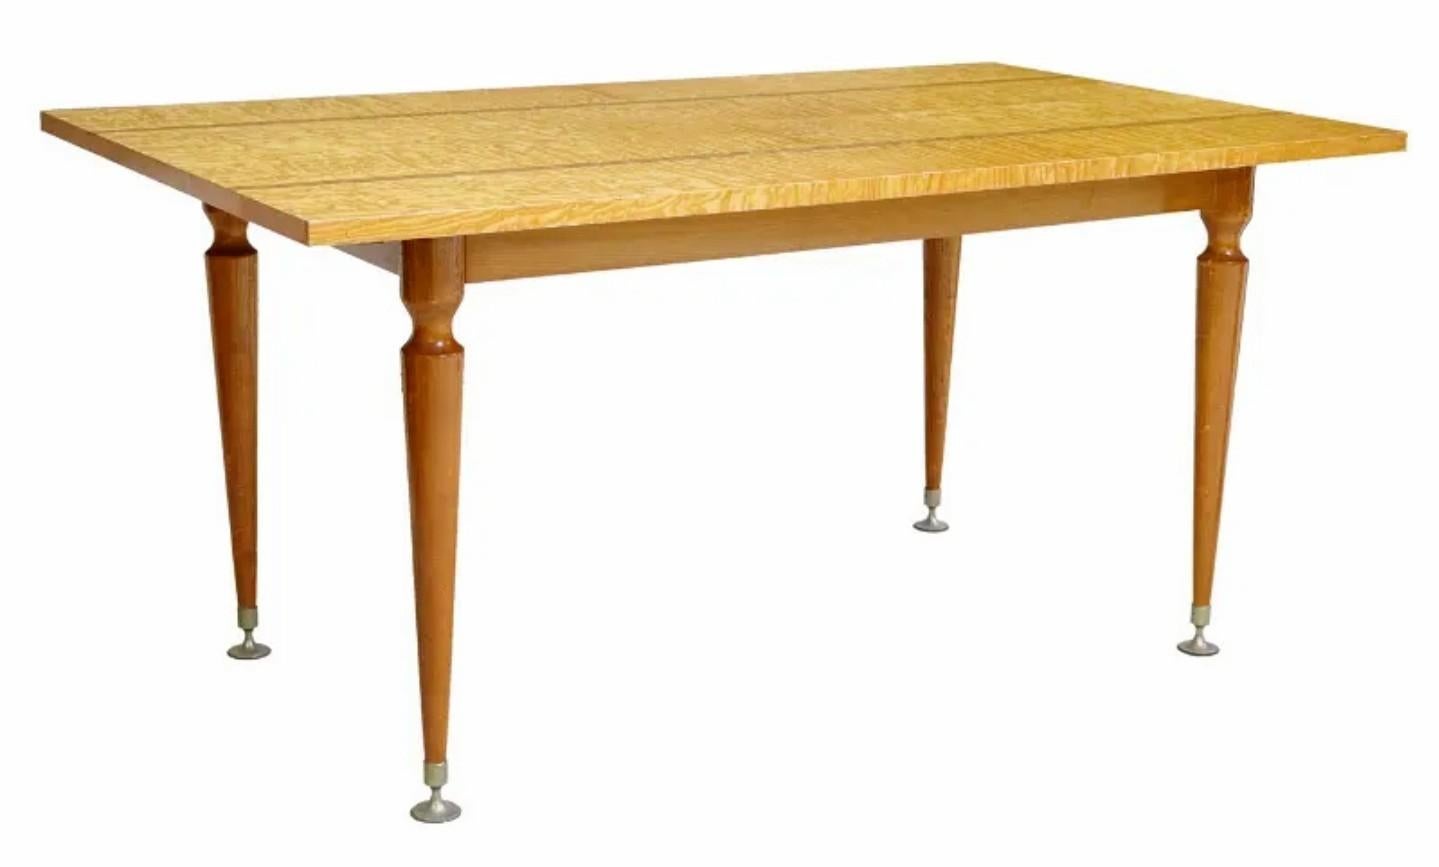 A fabulous designer French Mid-Century Modern dining table by NF Ameublement.

handcrafted in France, circa 1950s, exceptionally executed Scandinavian modernist taste, having a highly figured curly quilted sycamore maple top, with contrasting